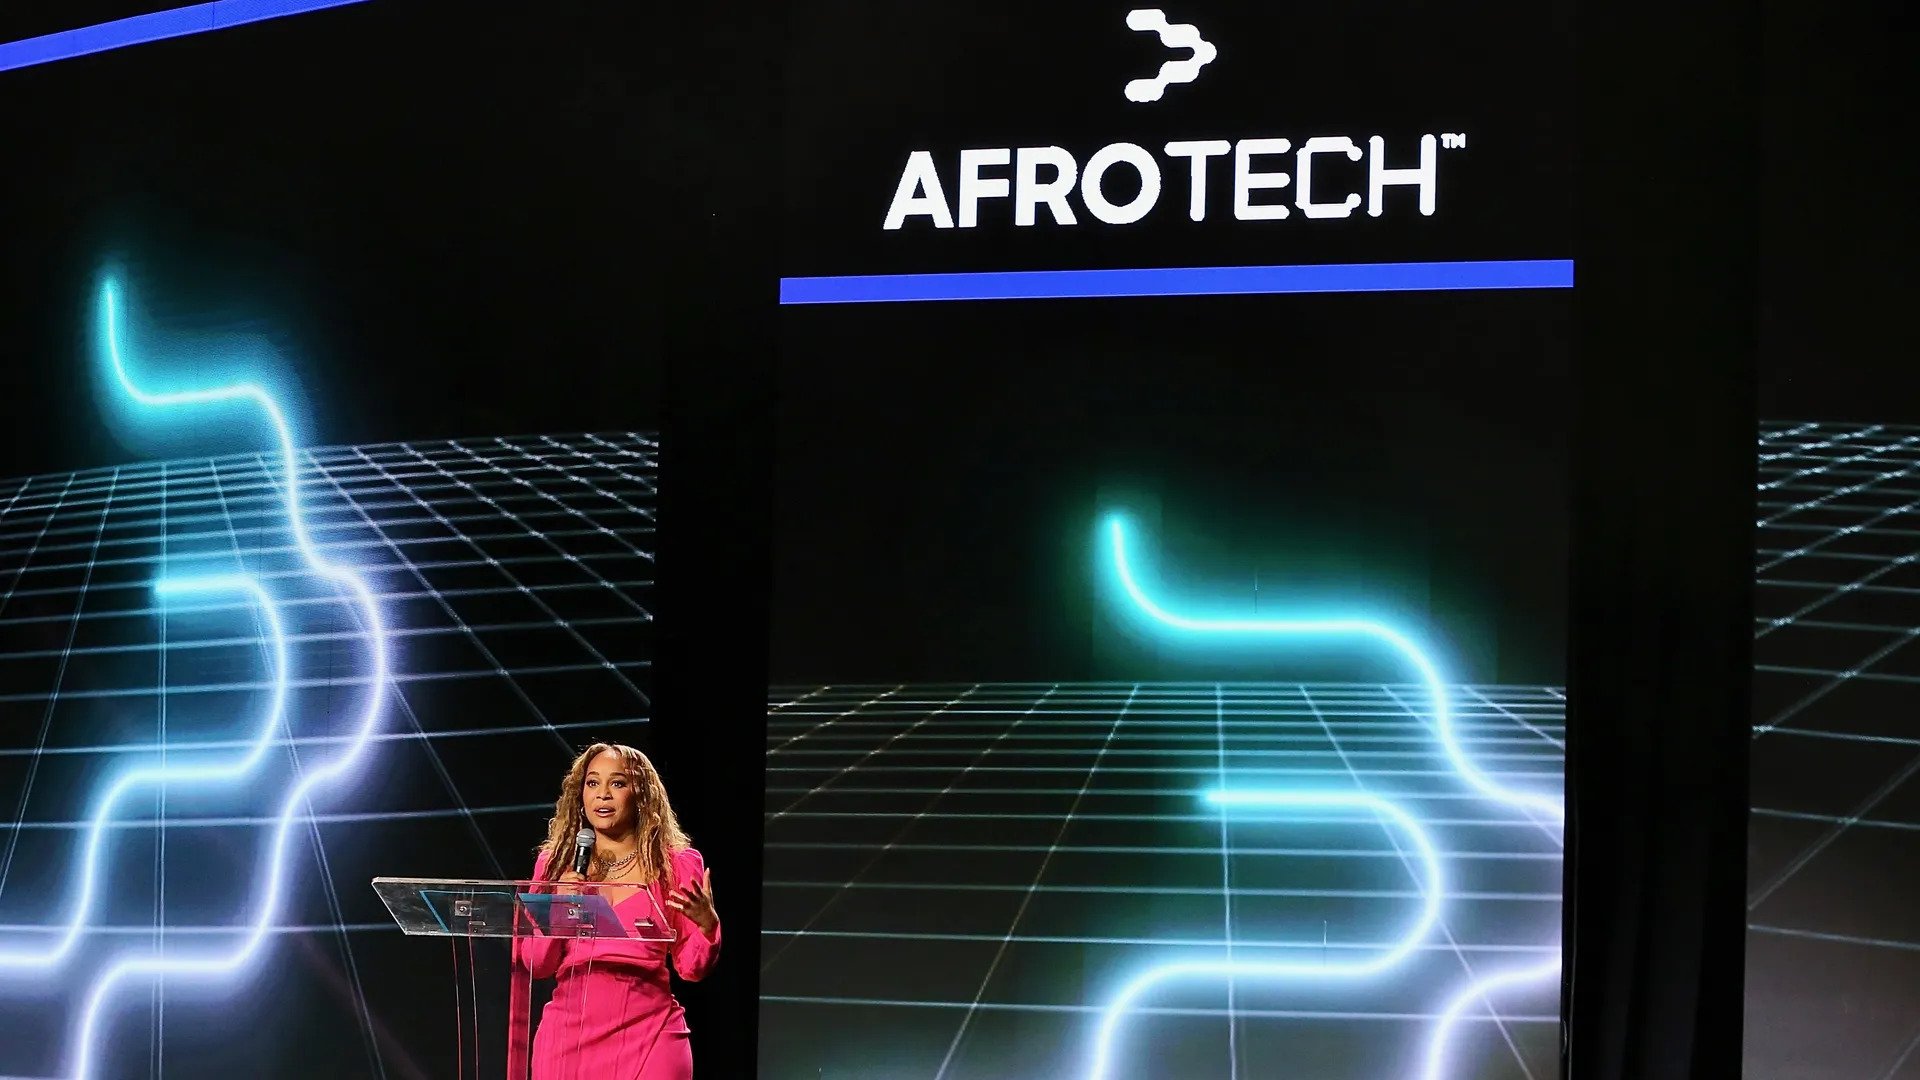 Blavity Inc. founder Morgan DeBaun standing on stage at the AfroTech conference wearing a pink dress